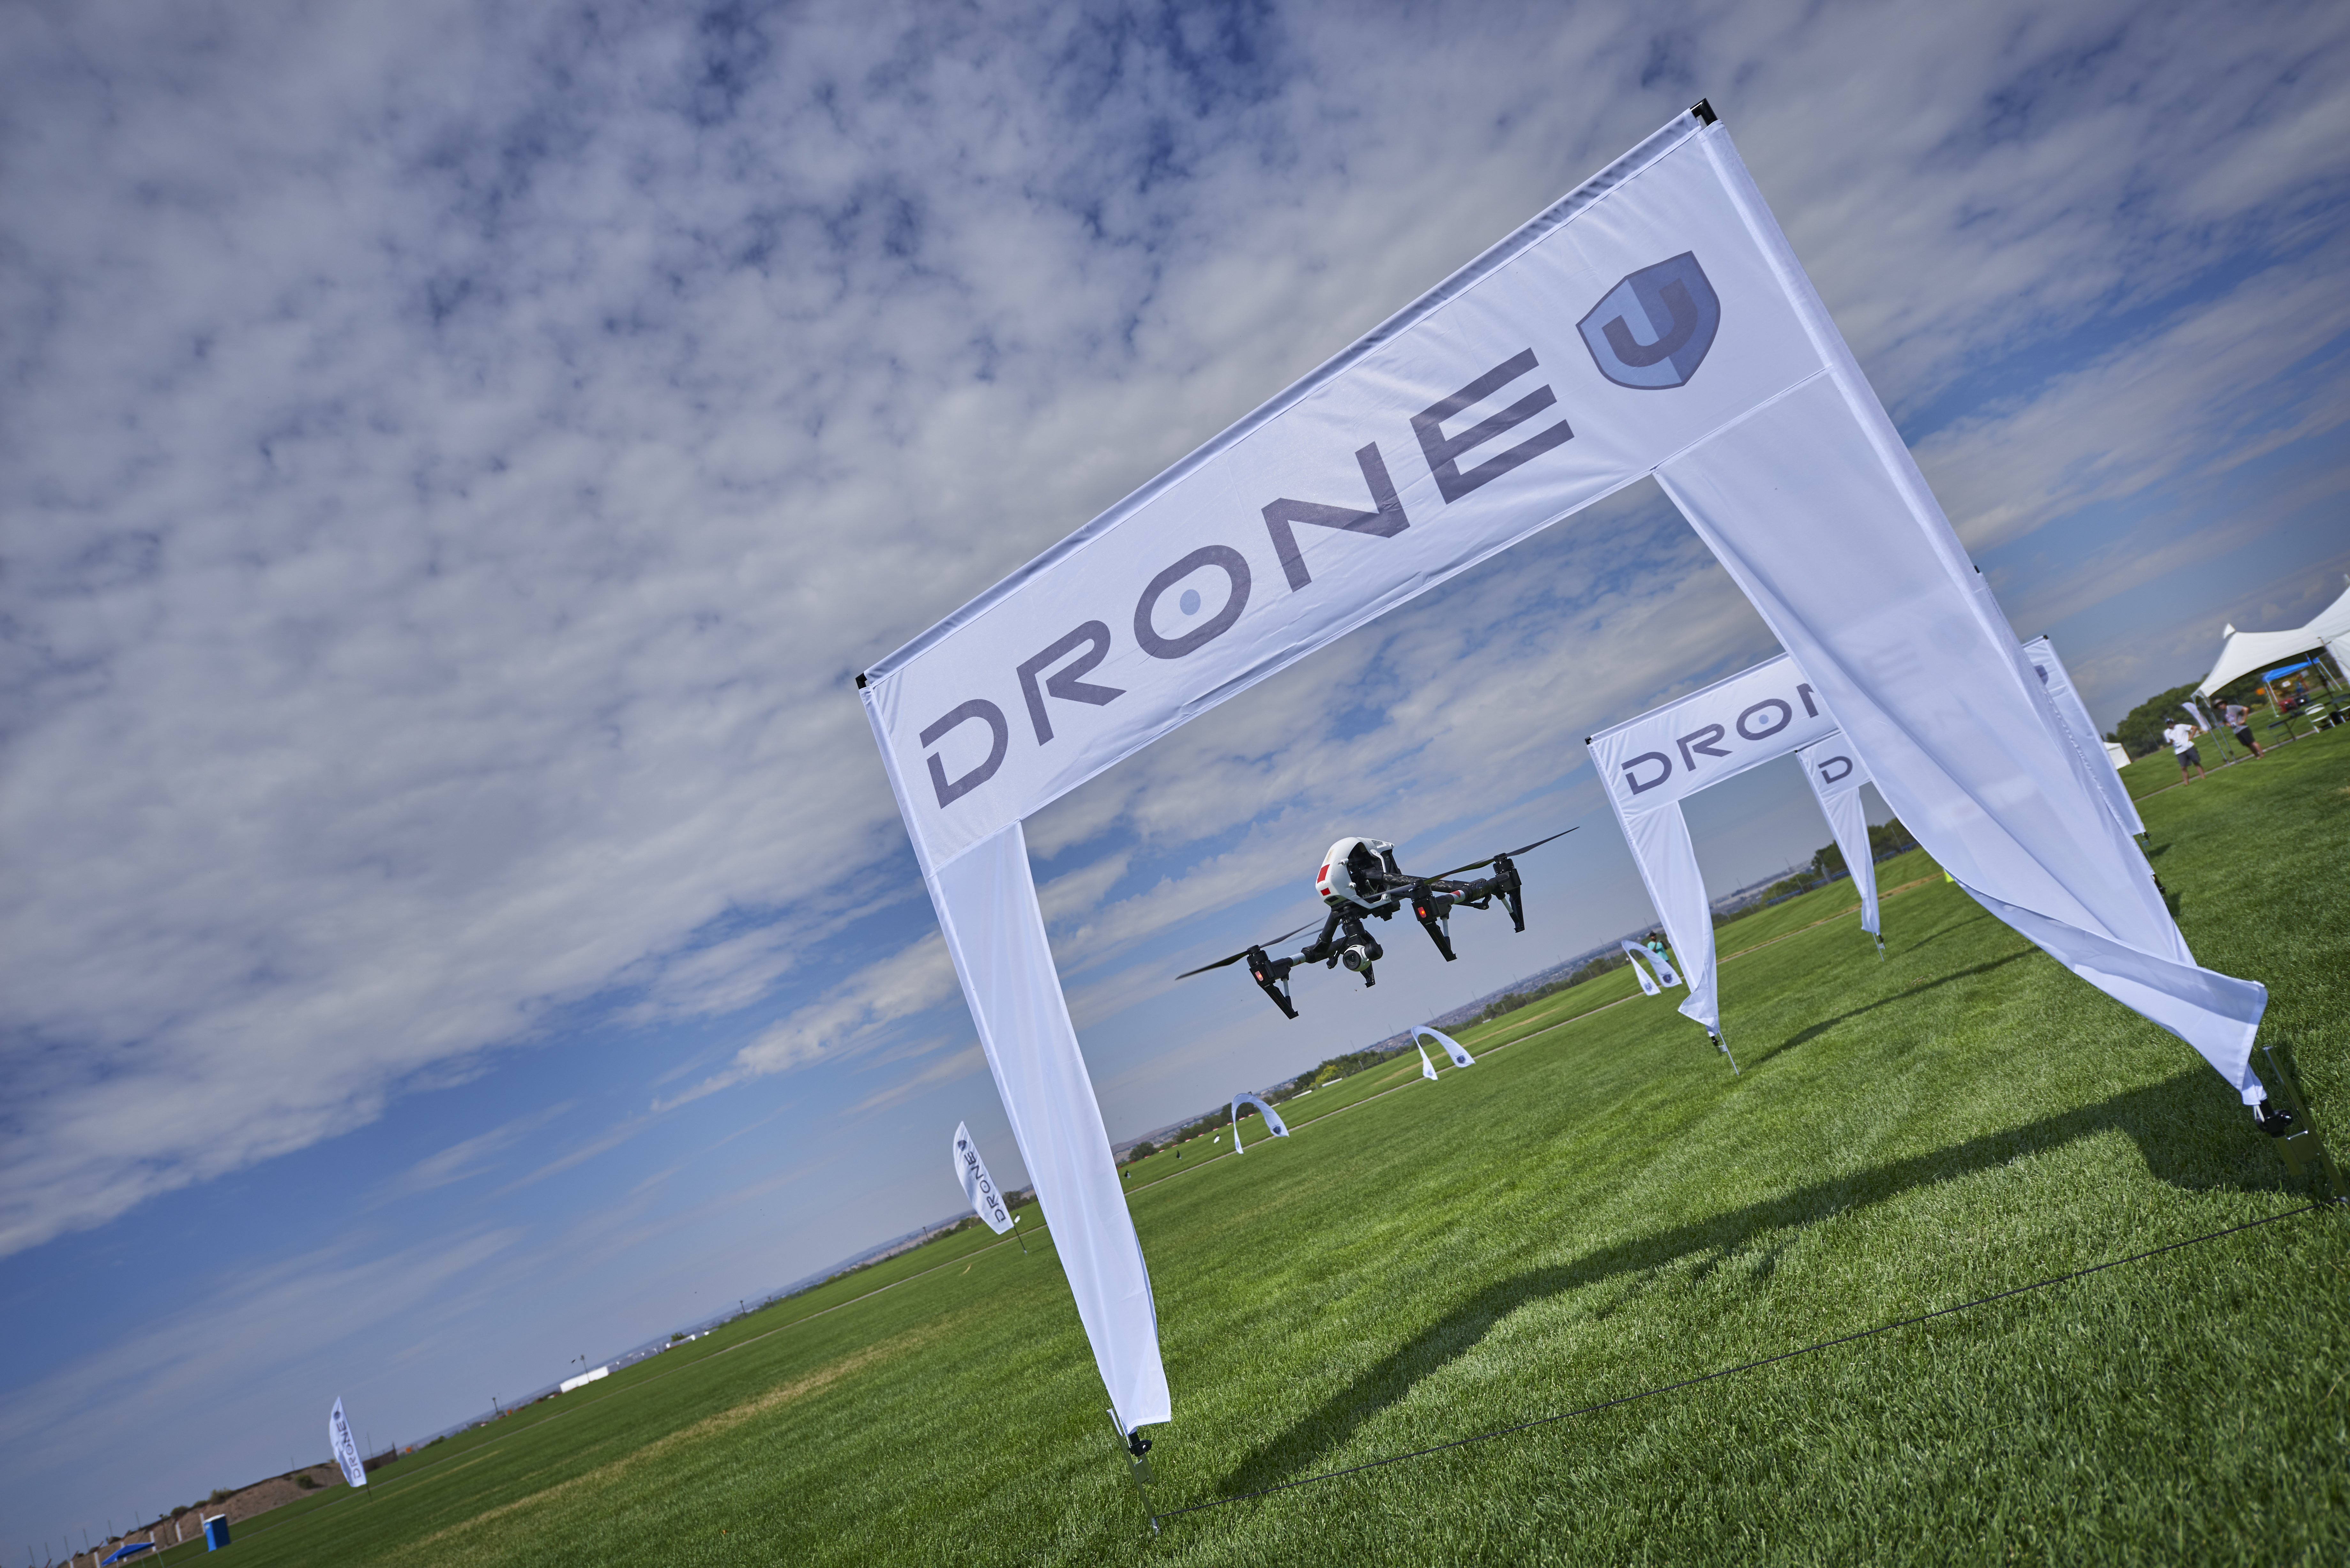 Learn to master drone flying through flight mastery obstacle course after getting your drone pilot license